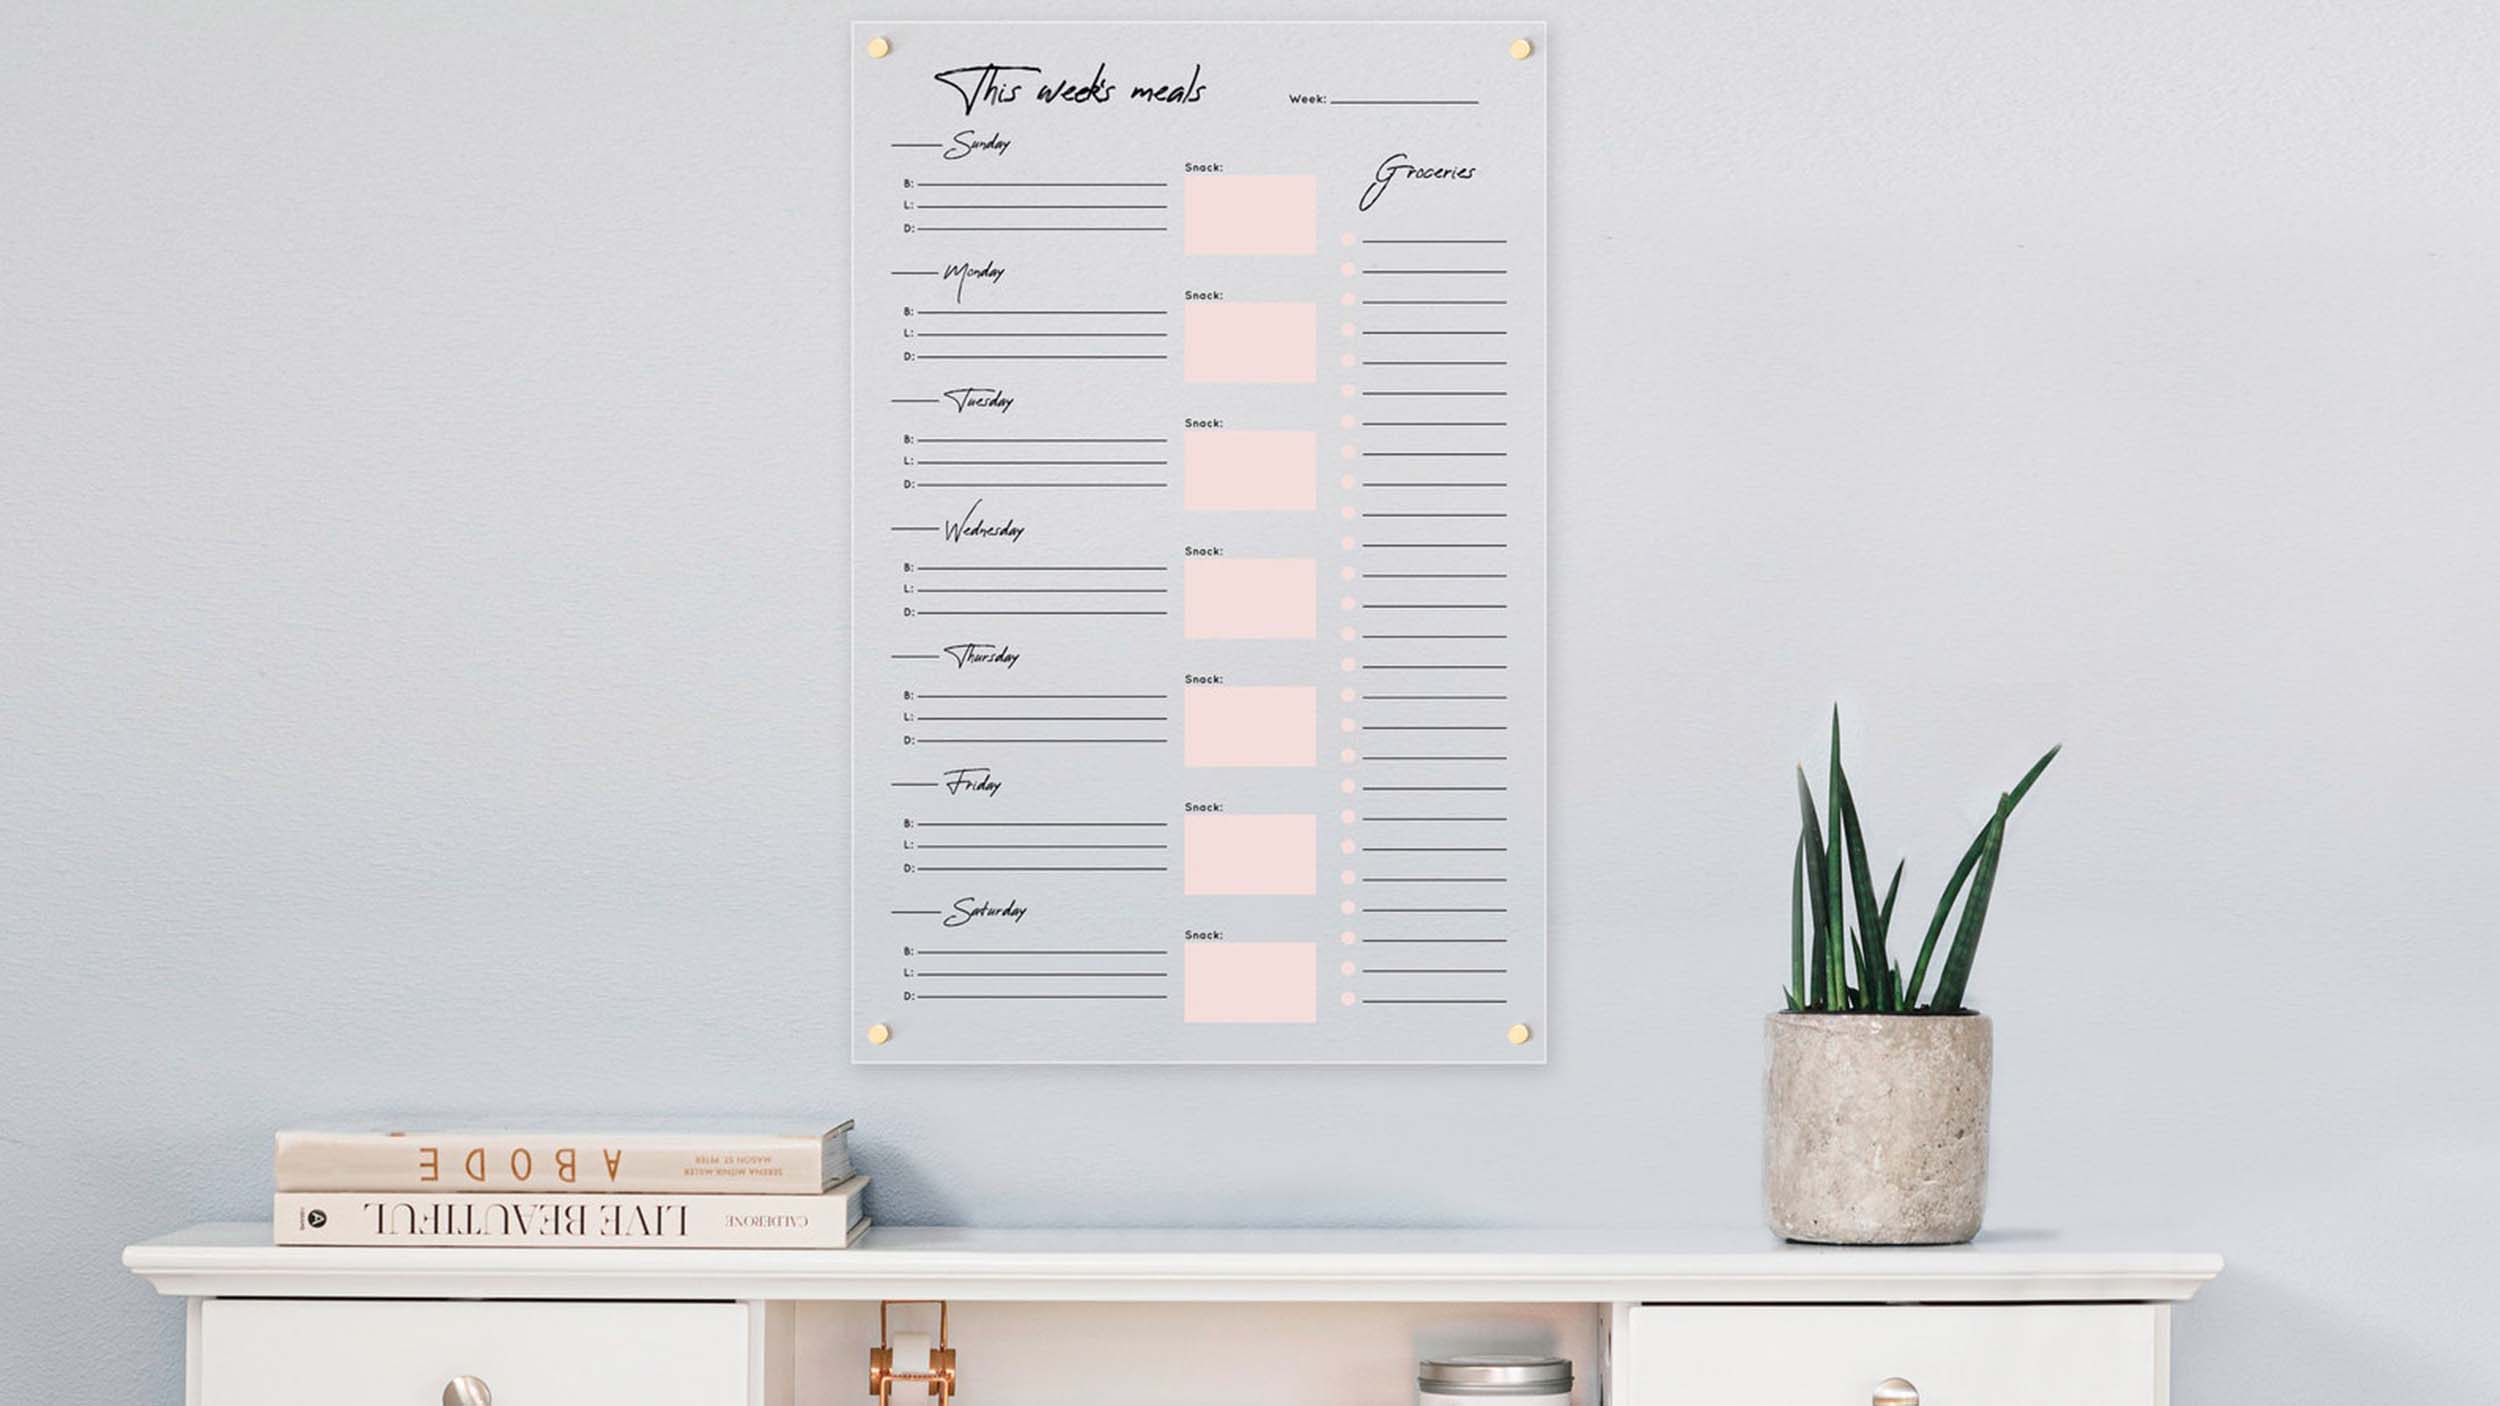 15 weekly meal planners that’ll make your life much easier | CNN Underscored